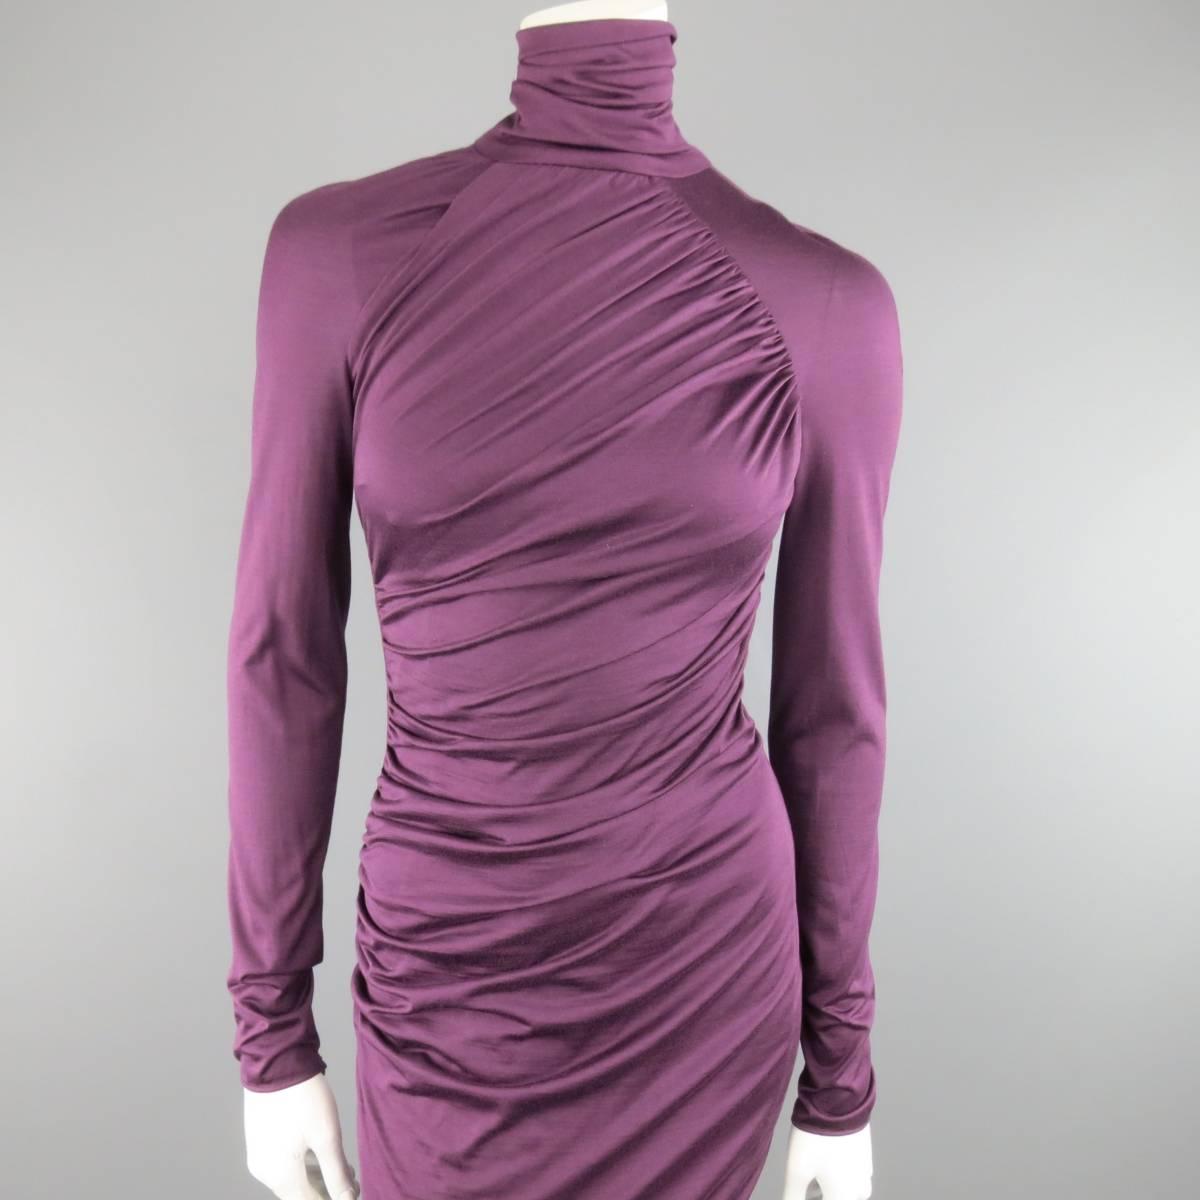 GIAMBATTISTA VALLI bodycon midi dress in a violet purple stretch silk jersey featuring long sleeves, high neck, and asymmetrical ruched drape details. Made in Italy.
 
Excellent Pre-Owned Condition.
Marked: 40/XS
 
Measurements:
 
Shoulder: 16